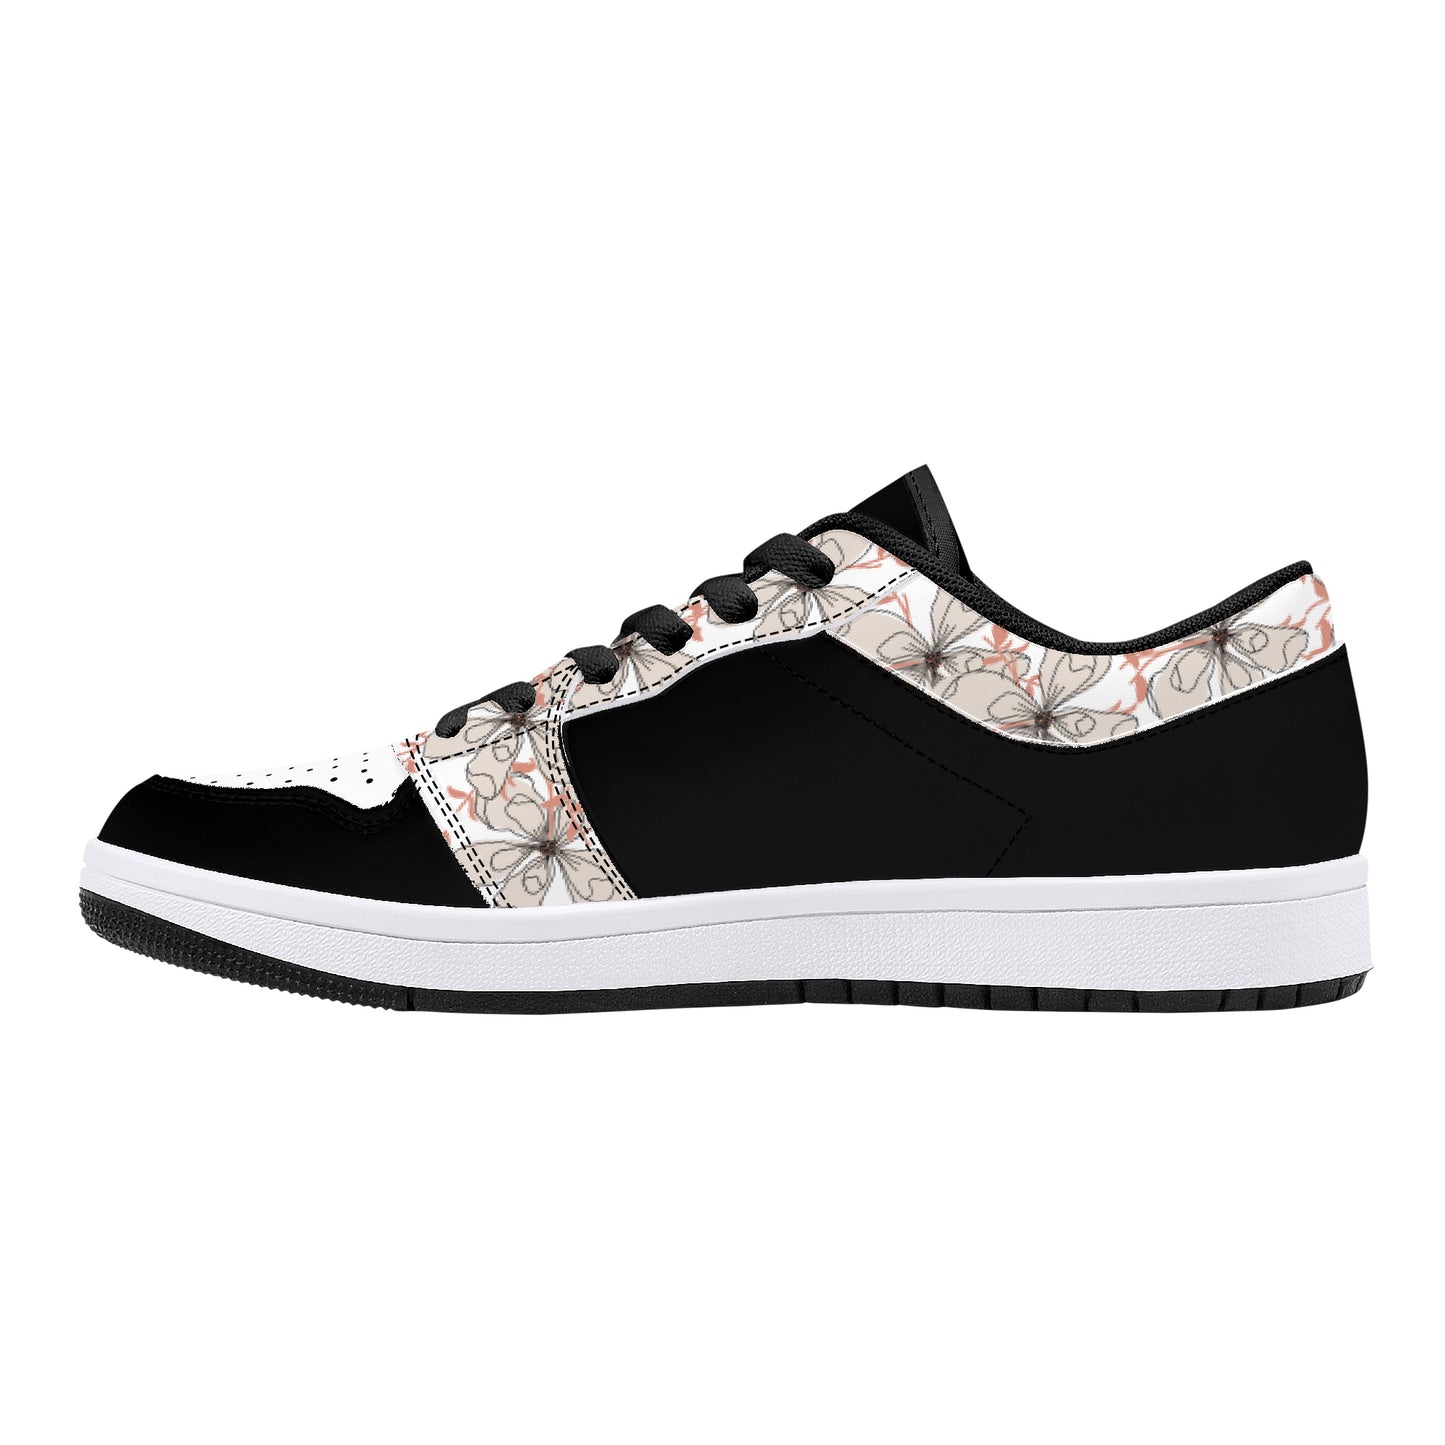 Leather Sneakers-Flower Trim-White Sole